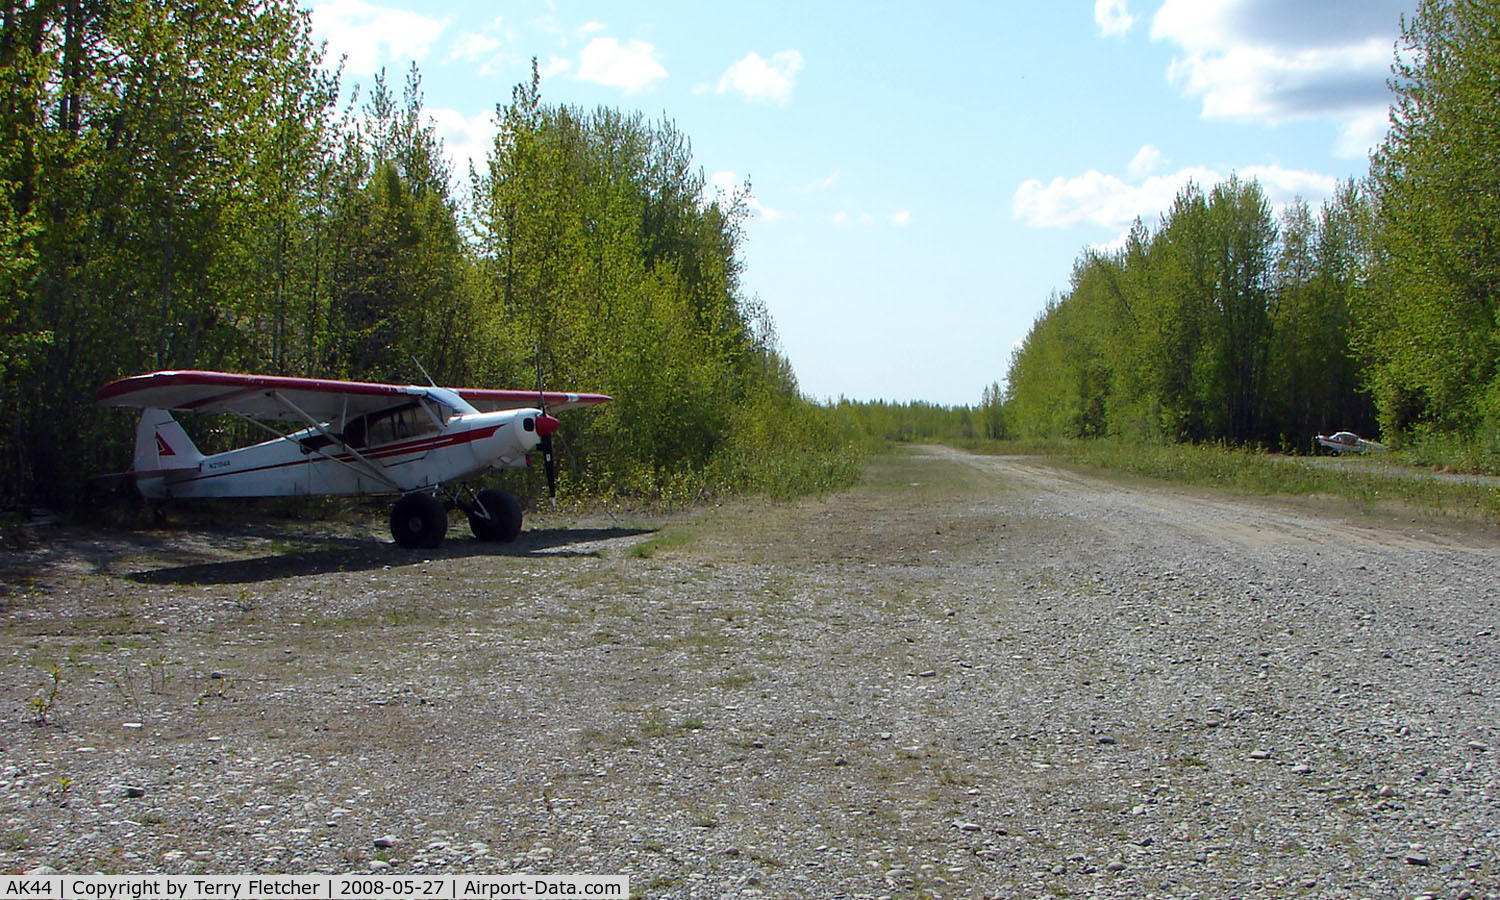 Talkeetna Village Strip Airport (AK44) - The Talkeetna Village Airstrip is preserved on the National Register for the part is played in the pioneering flights involving Mt.McKinley